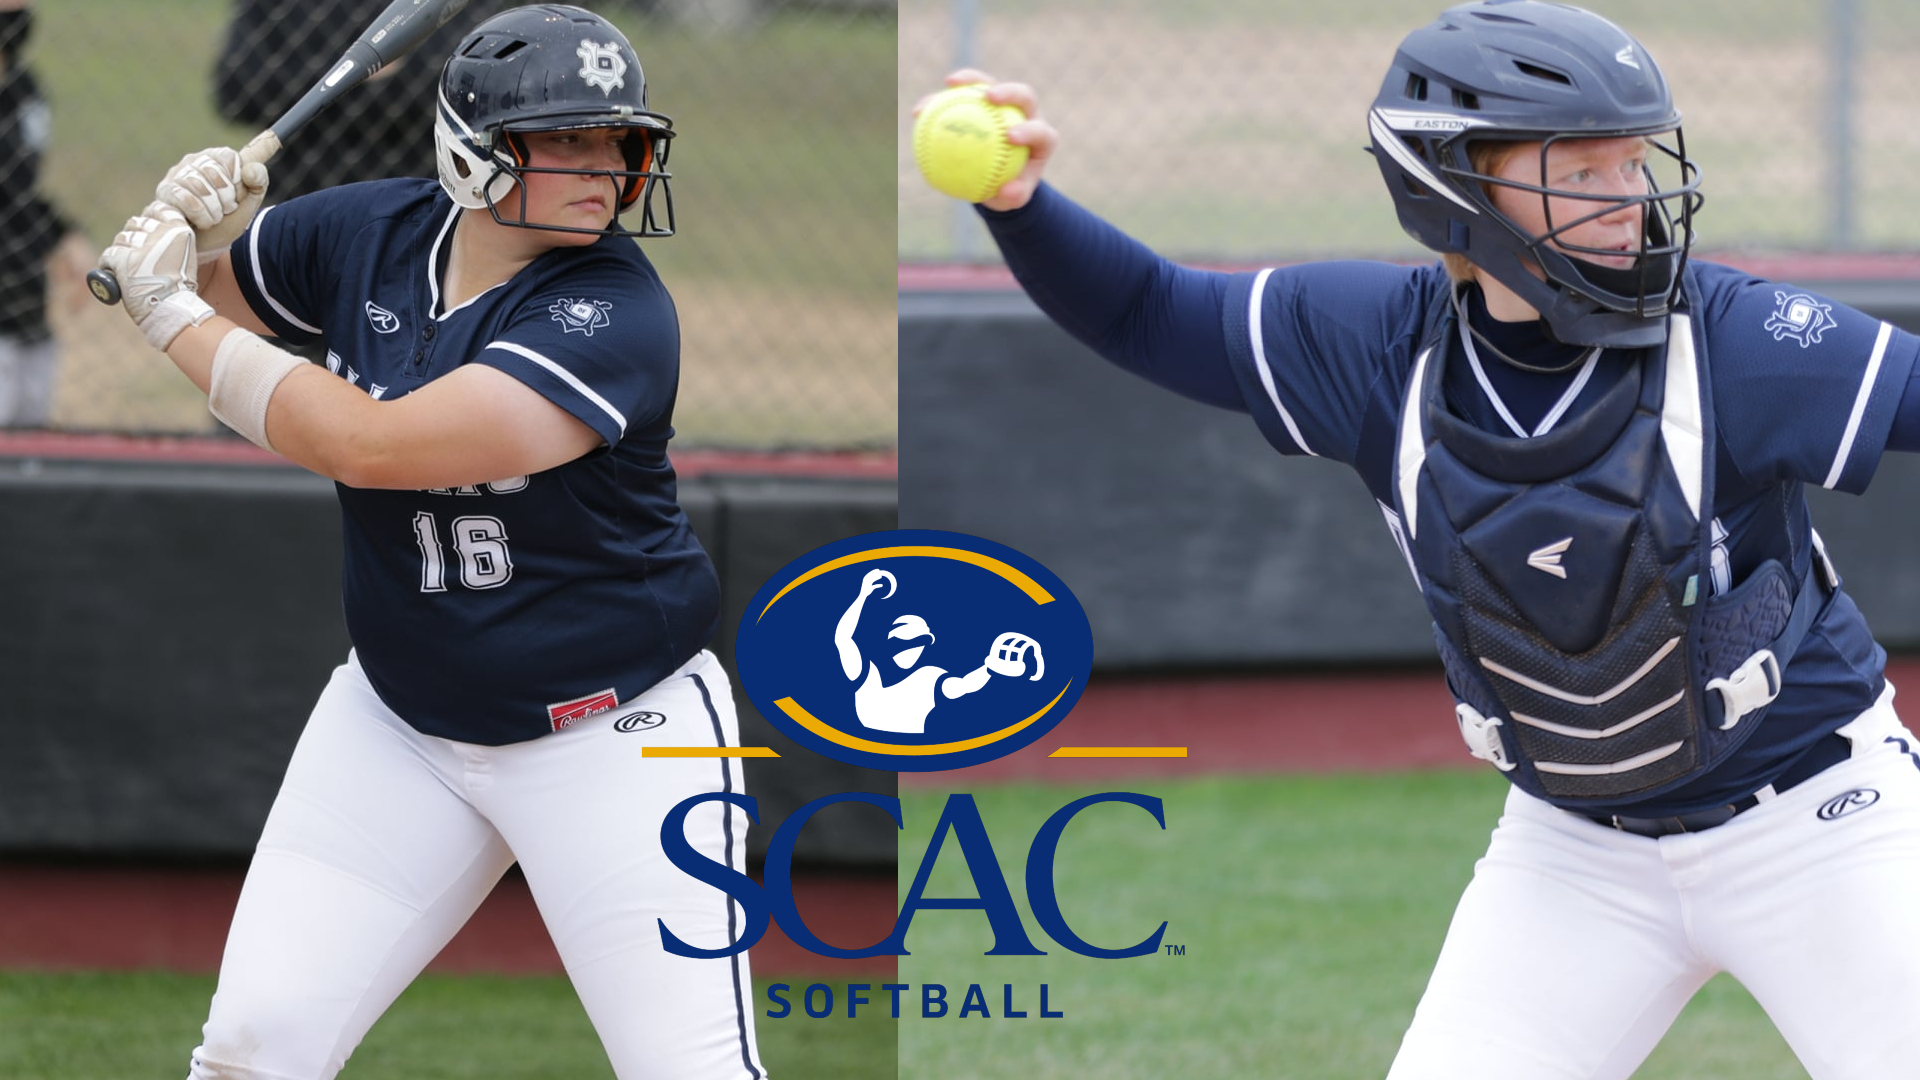 Anderson Earns All-SCAC Second Team; Coutts Honorable Mention for Softball Conference Accolades